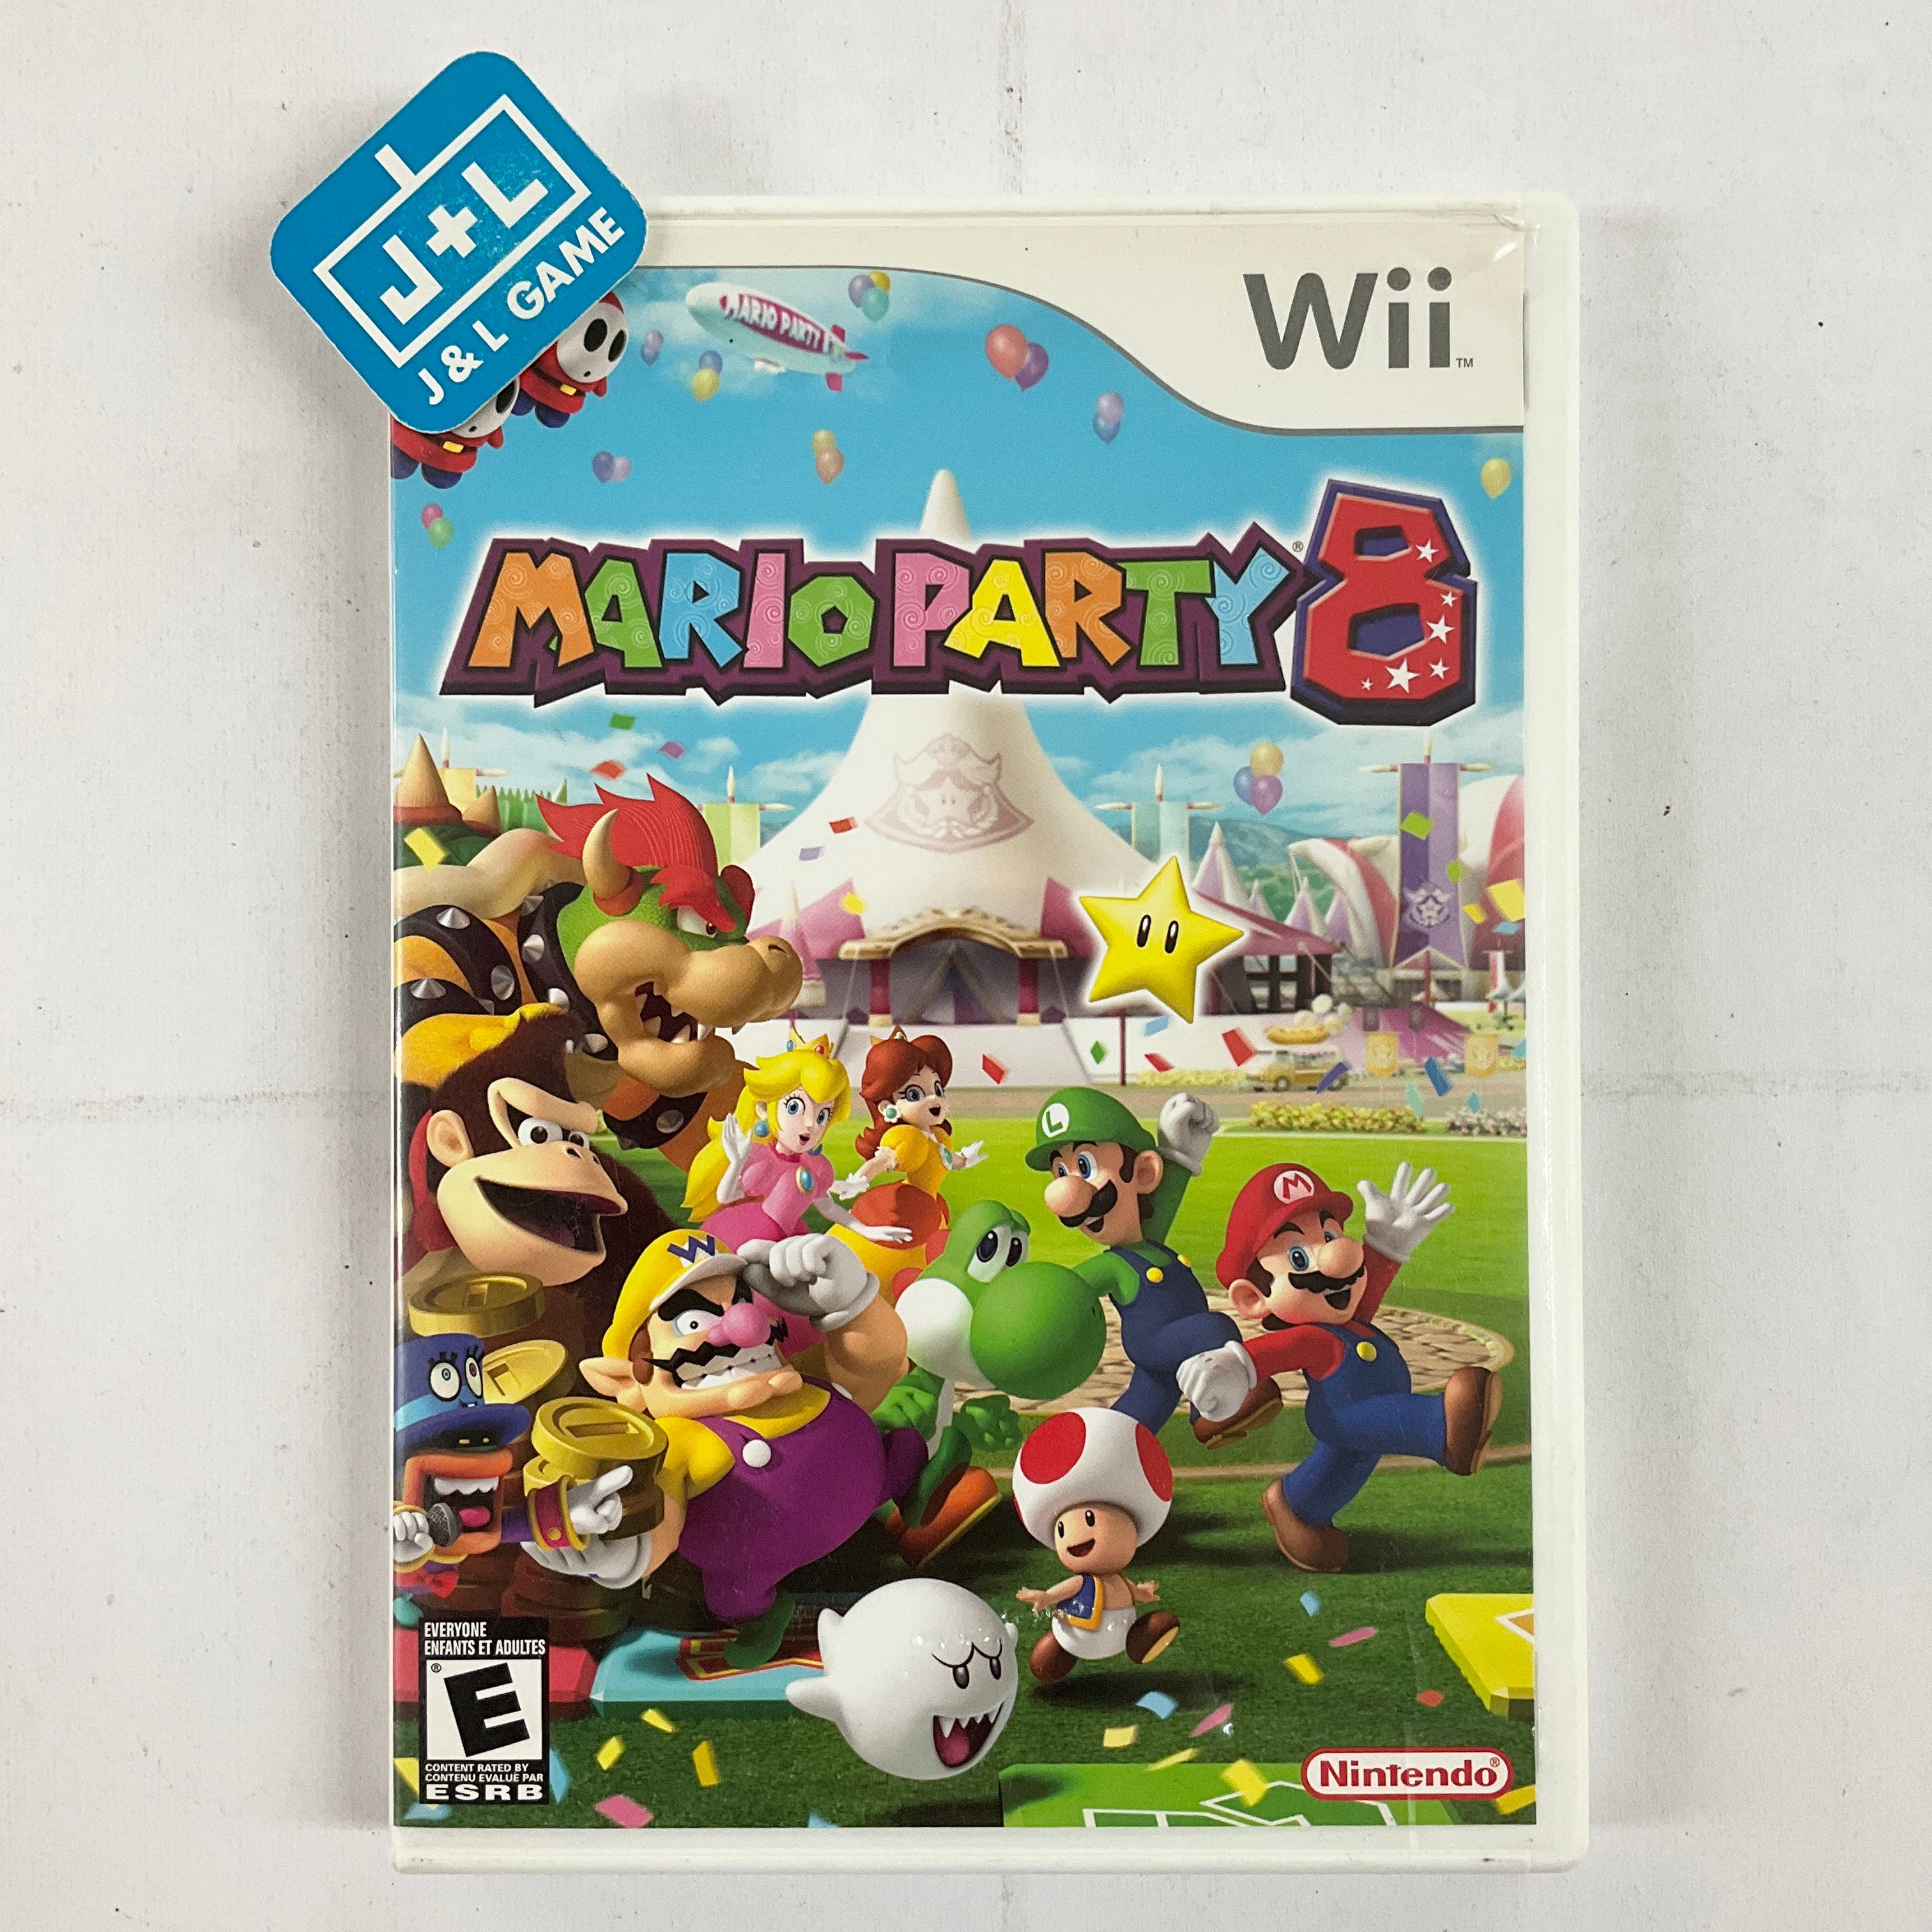 Mario Party 9 - Nintendo Wii (World Edition) | J&L Game